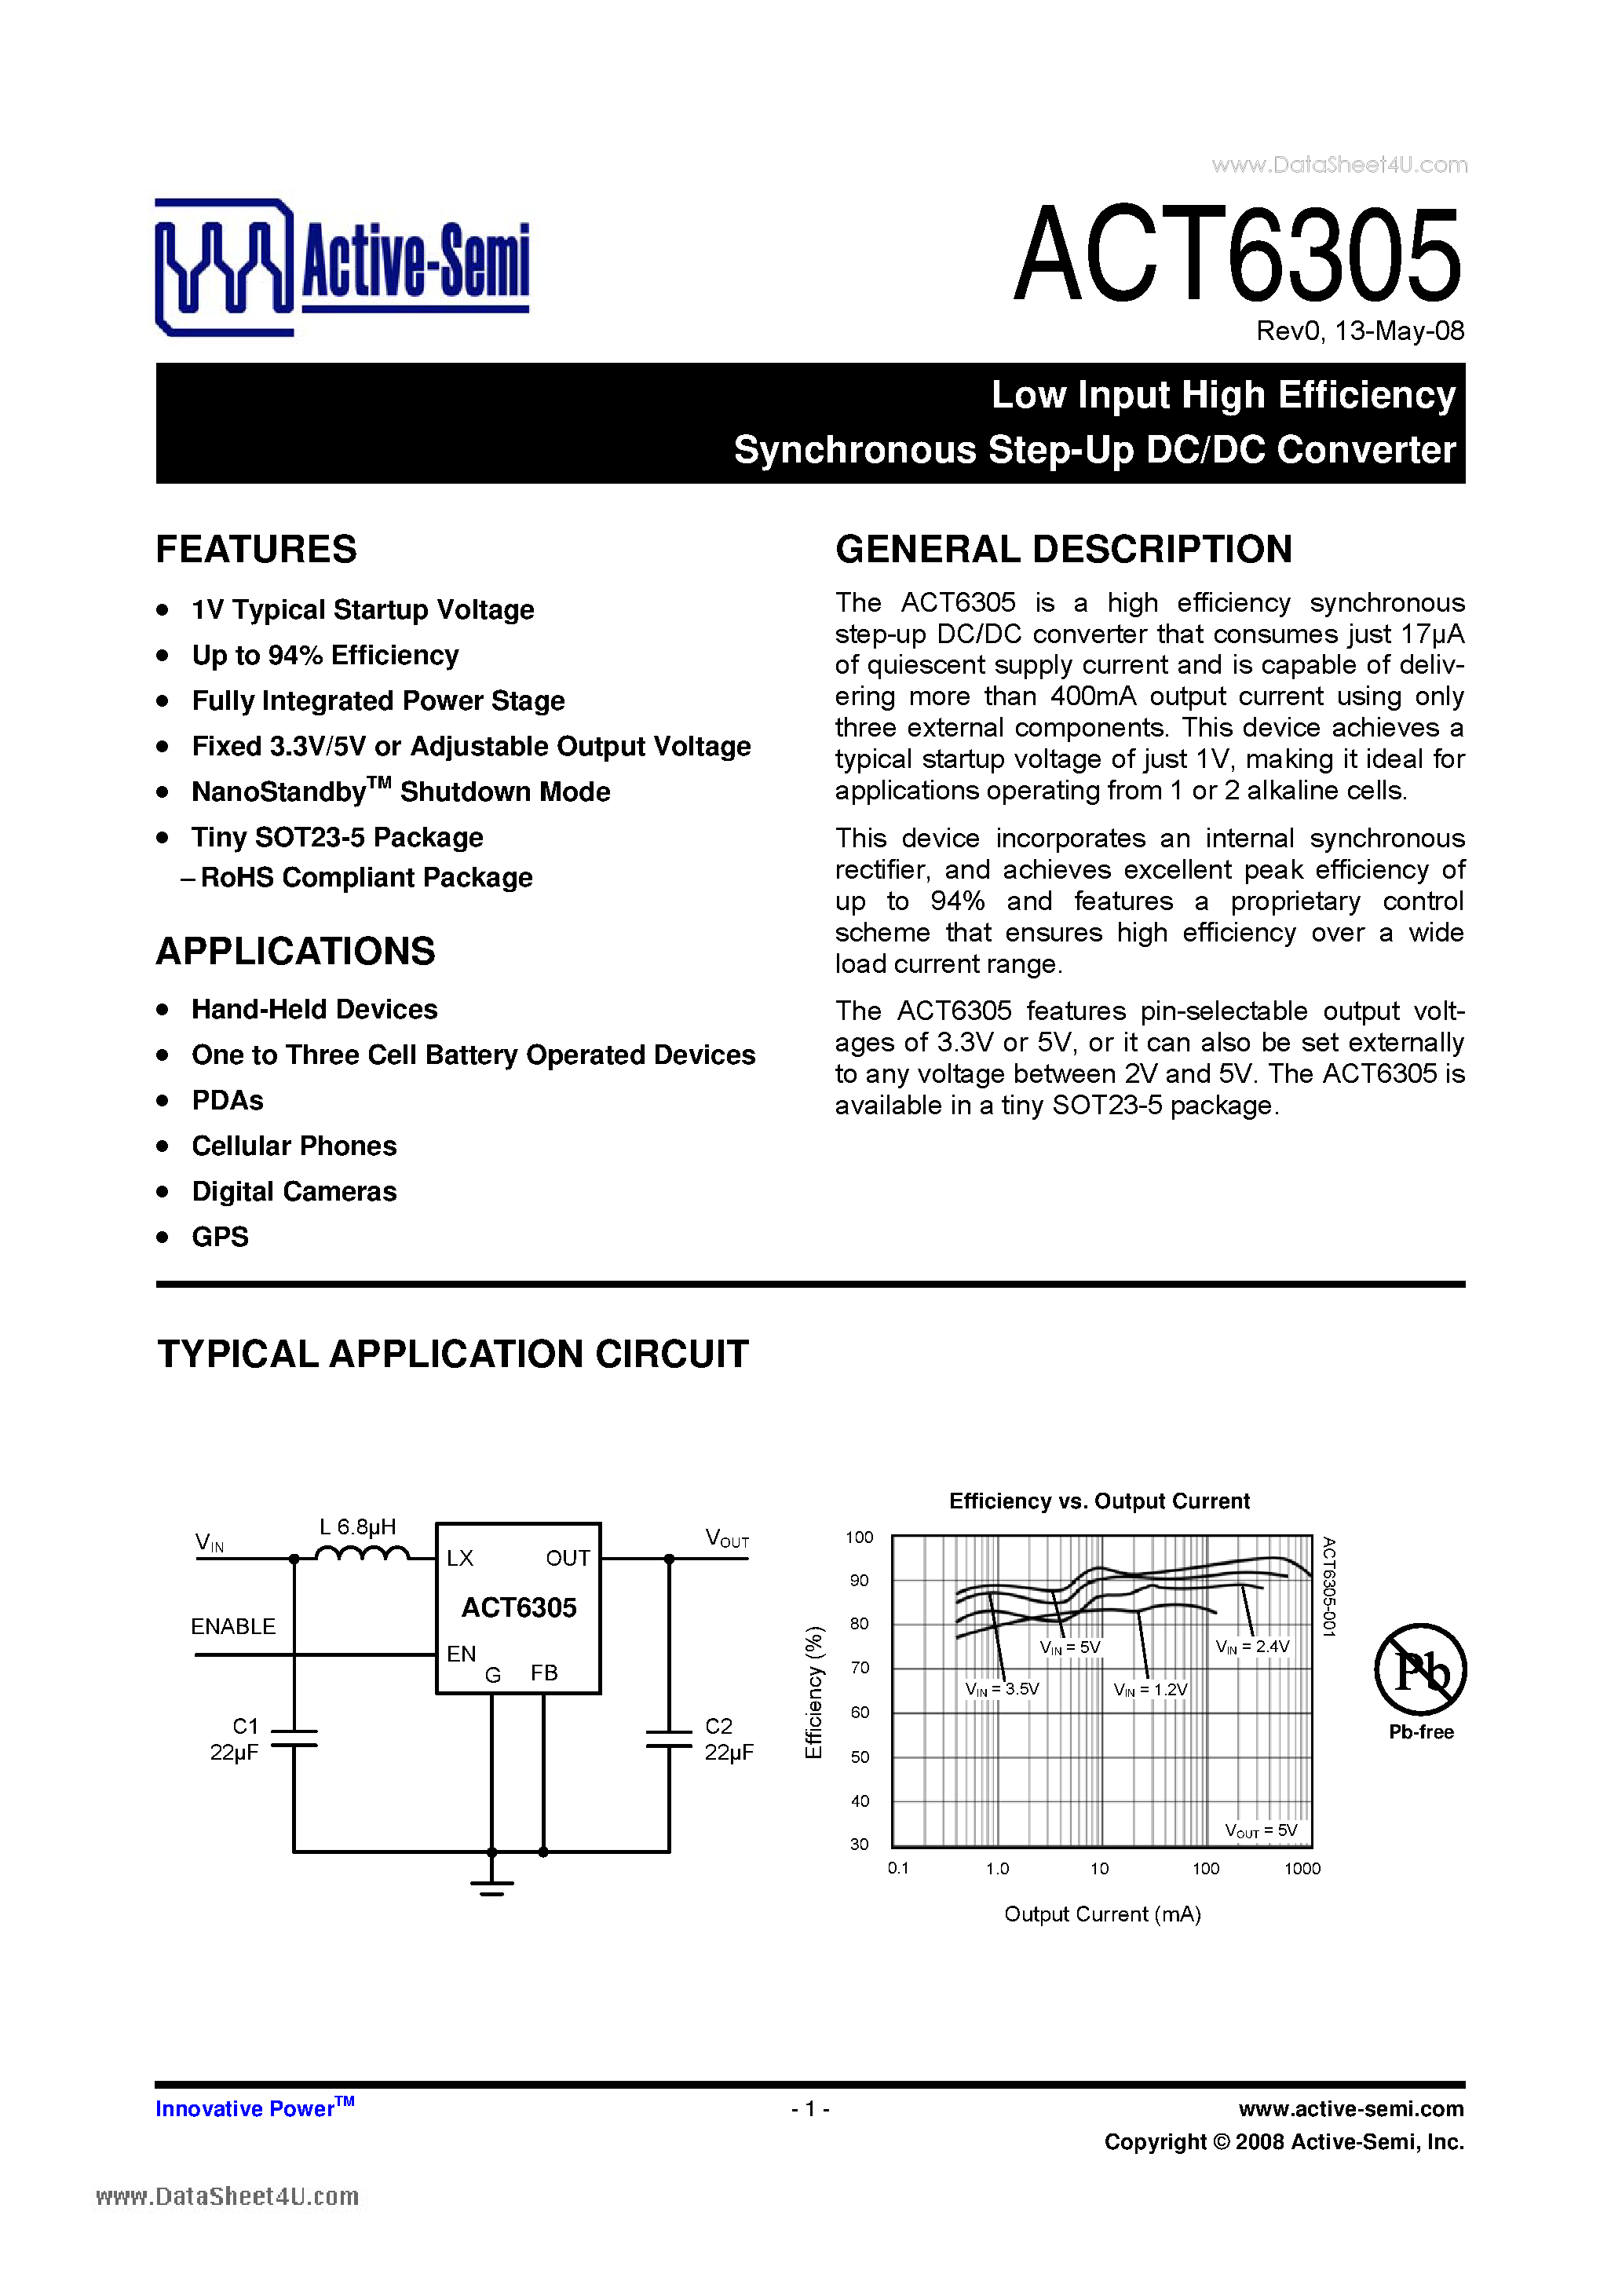 Даташит ACT6305-Low Input High Efficiency Synchronous Step-Up DC/DC Converter страница 1